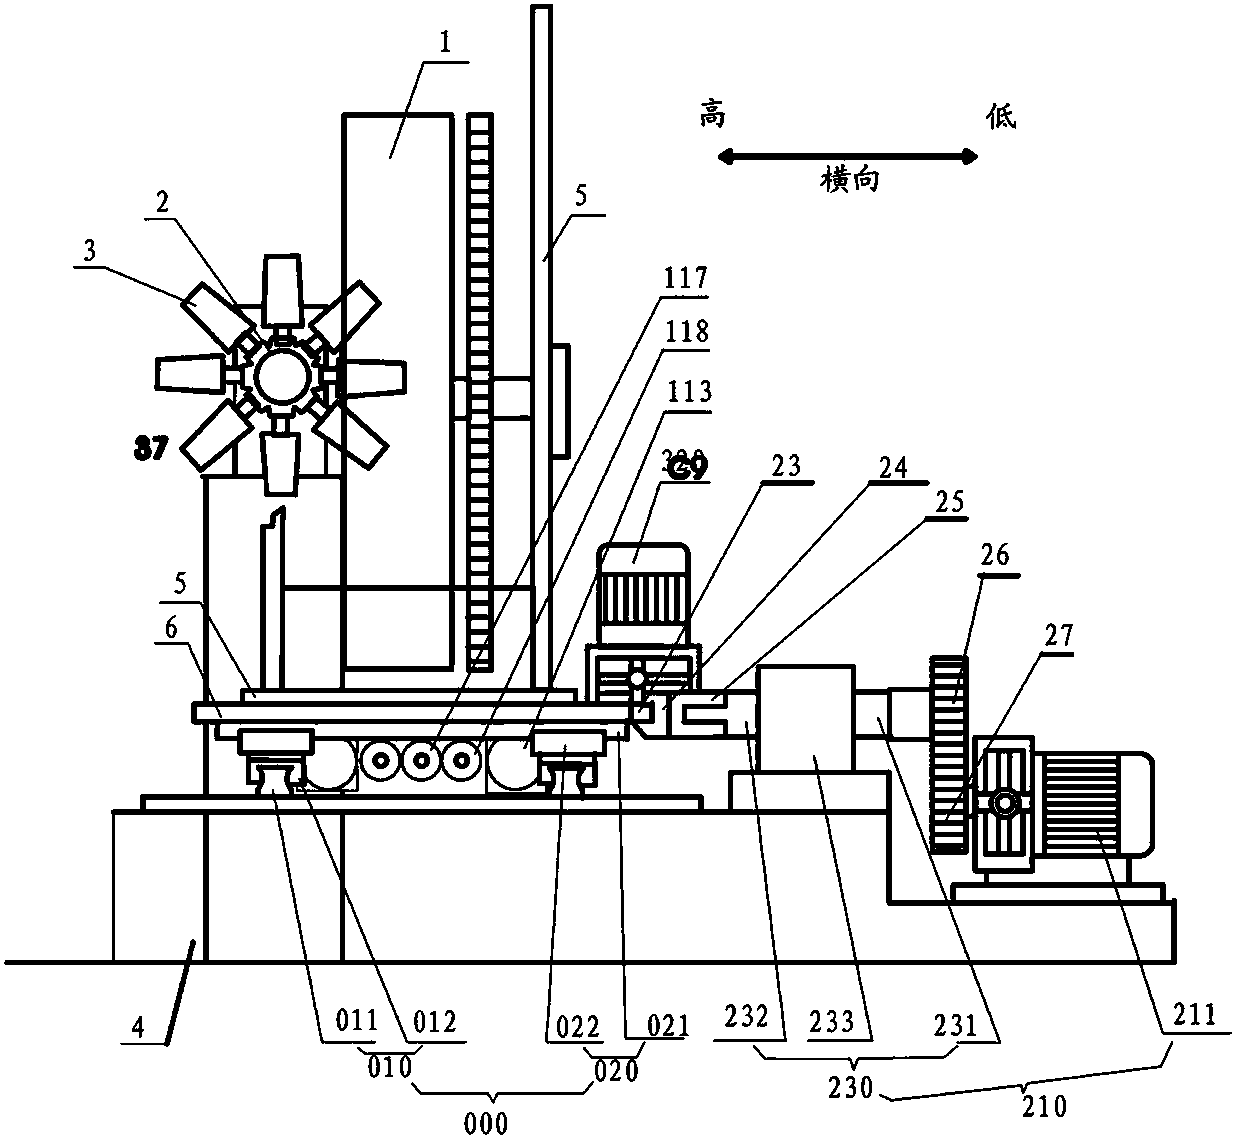 Embedded numerical-control printing pressing force adjustment and clearance tolerance elimination device